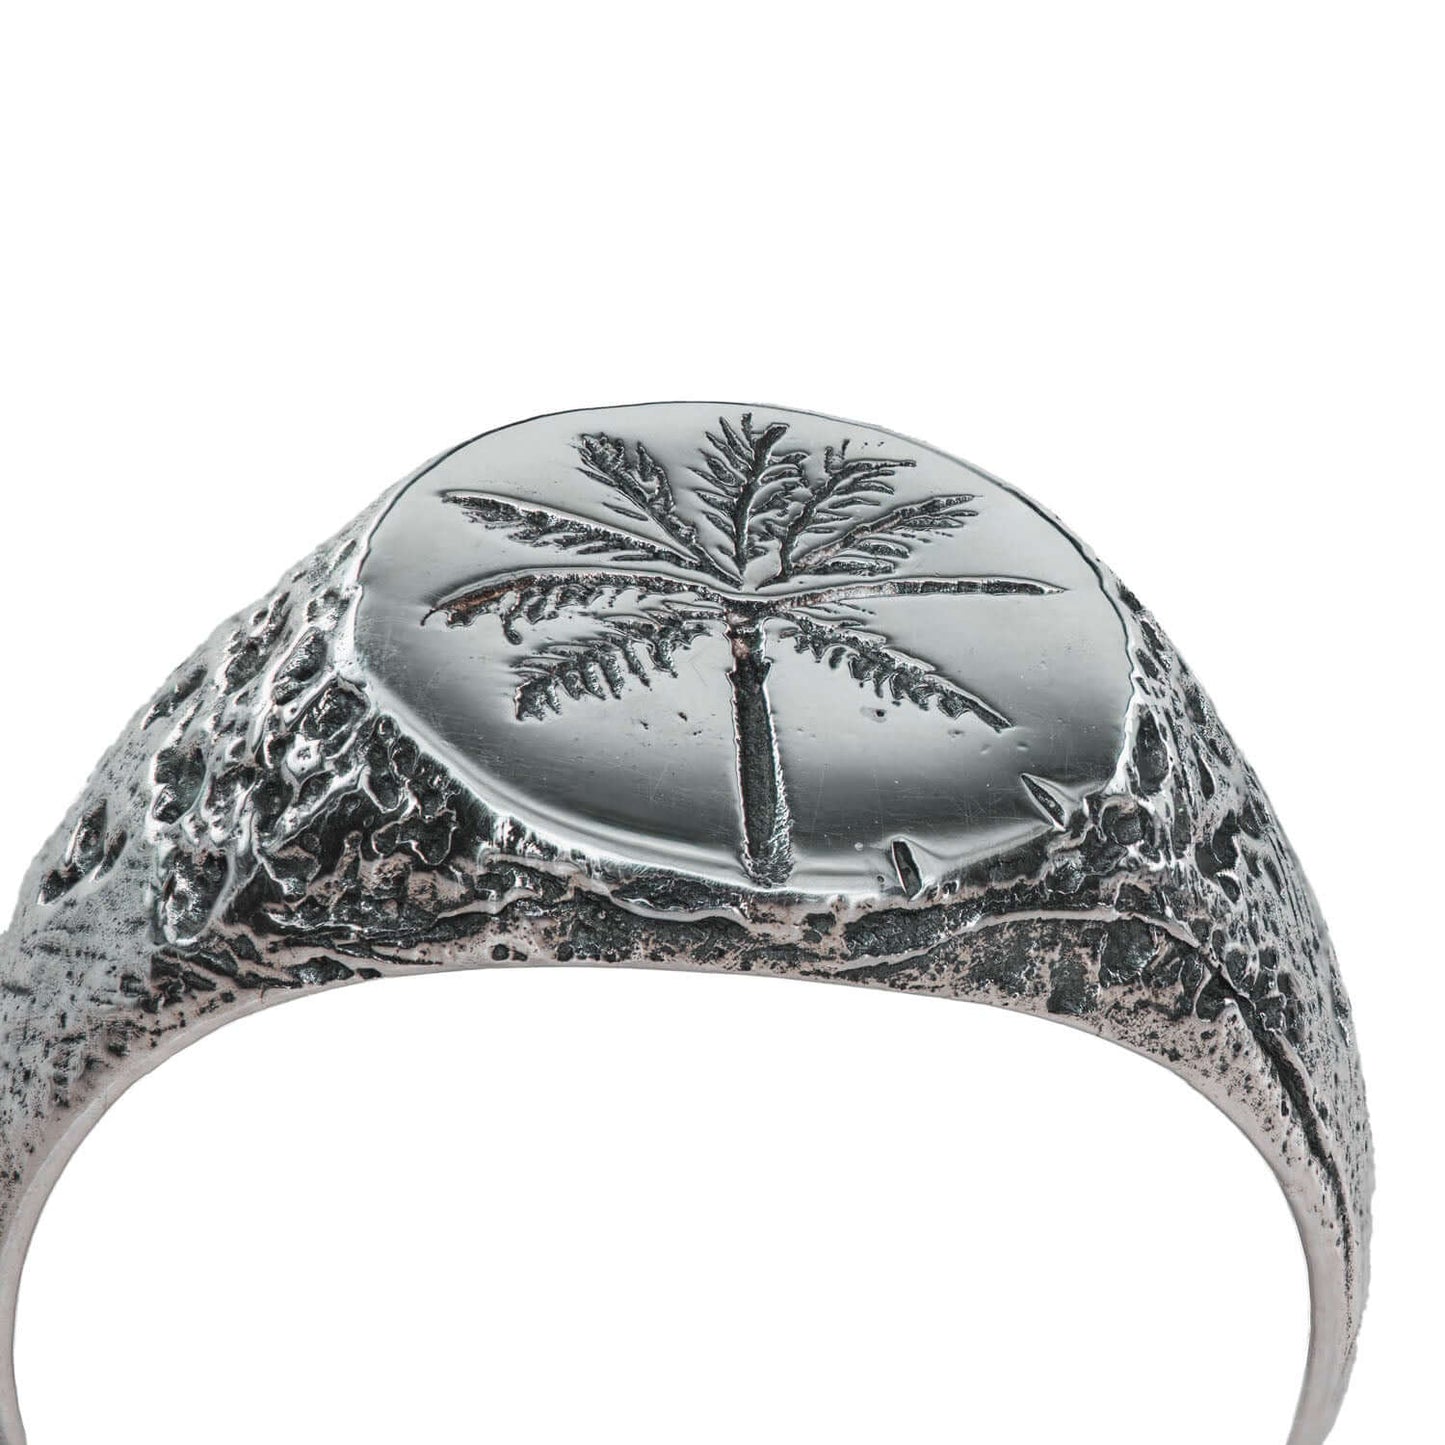 PALM RING. - 925 Silver Signet Ring 13mm - PALM. | Handcrafted Jewelry-